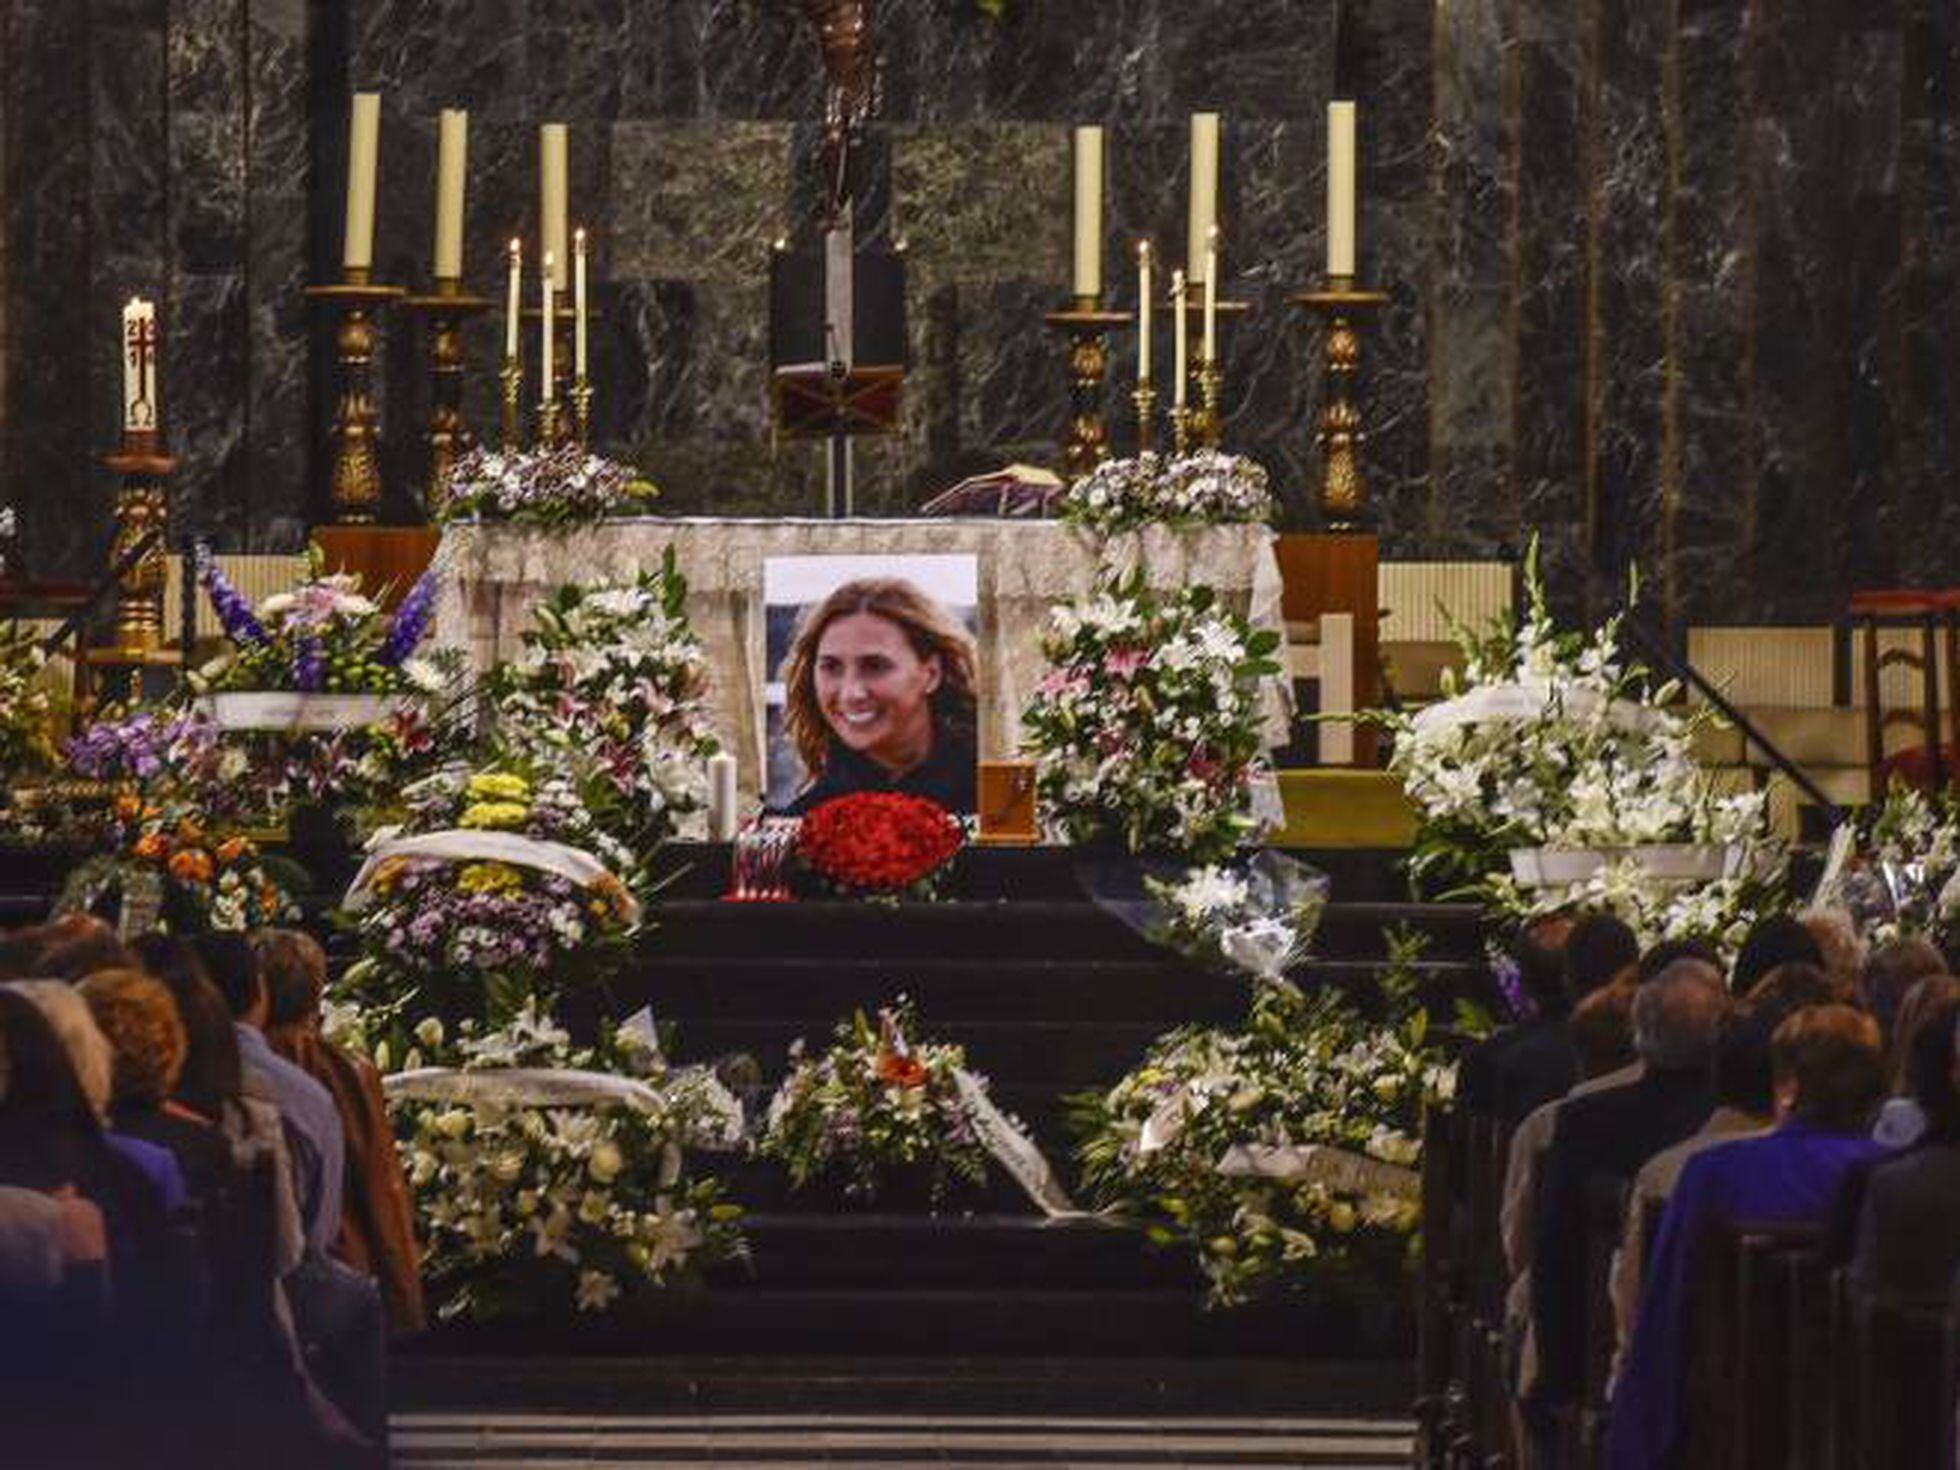 Kidnapping in Mexico: Mexican police release grisly details of María Villar  kidnapping and killing | International | EL PAÍS English Edition